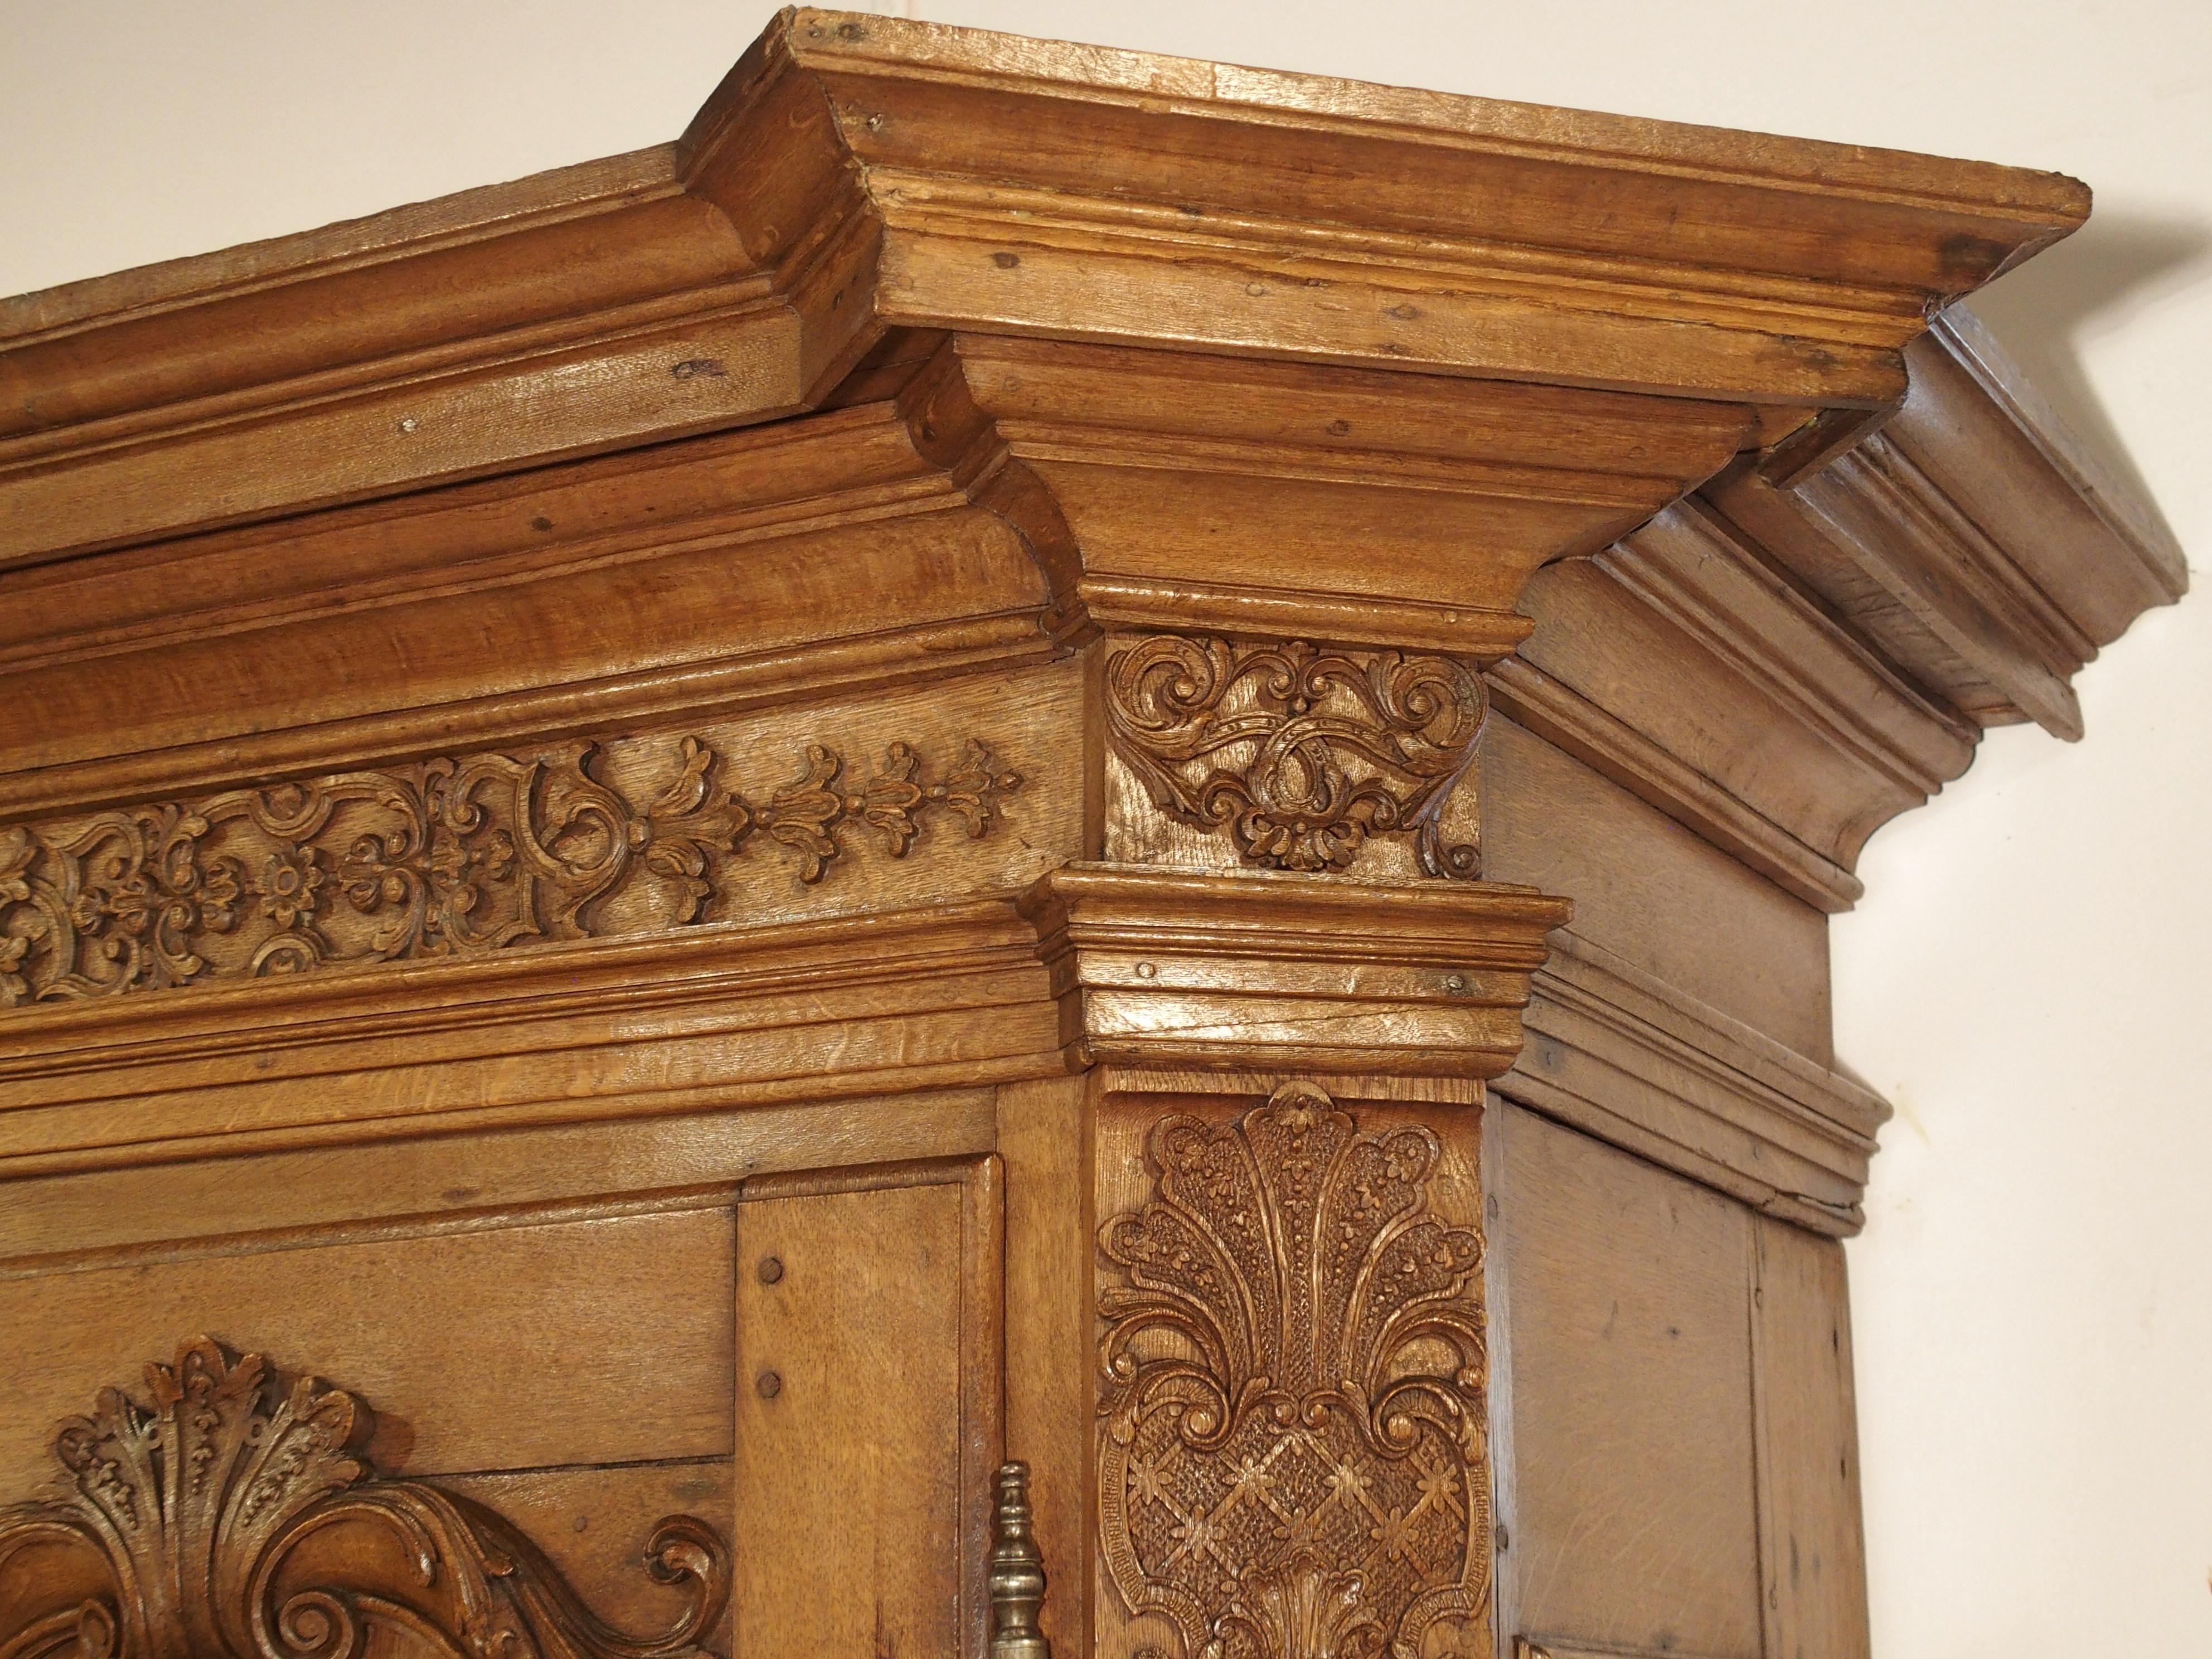 From the Regence period, this oak armoire was hand carved in France, circa 1720. Regence was the period of French history when the nation was governed by Philippe d’Orléans while the future king, Louis XV, was too young to rule. This period of